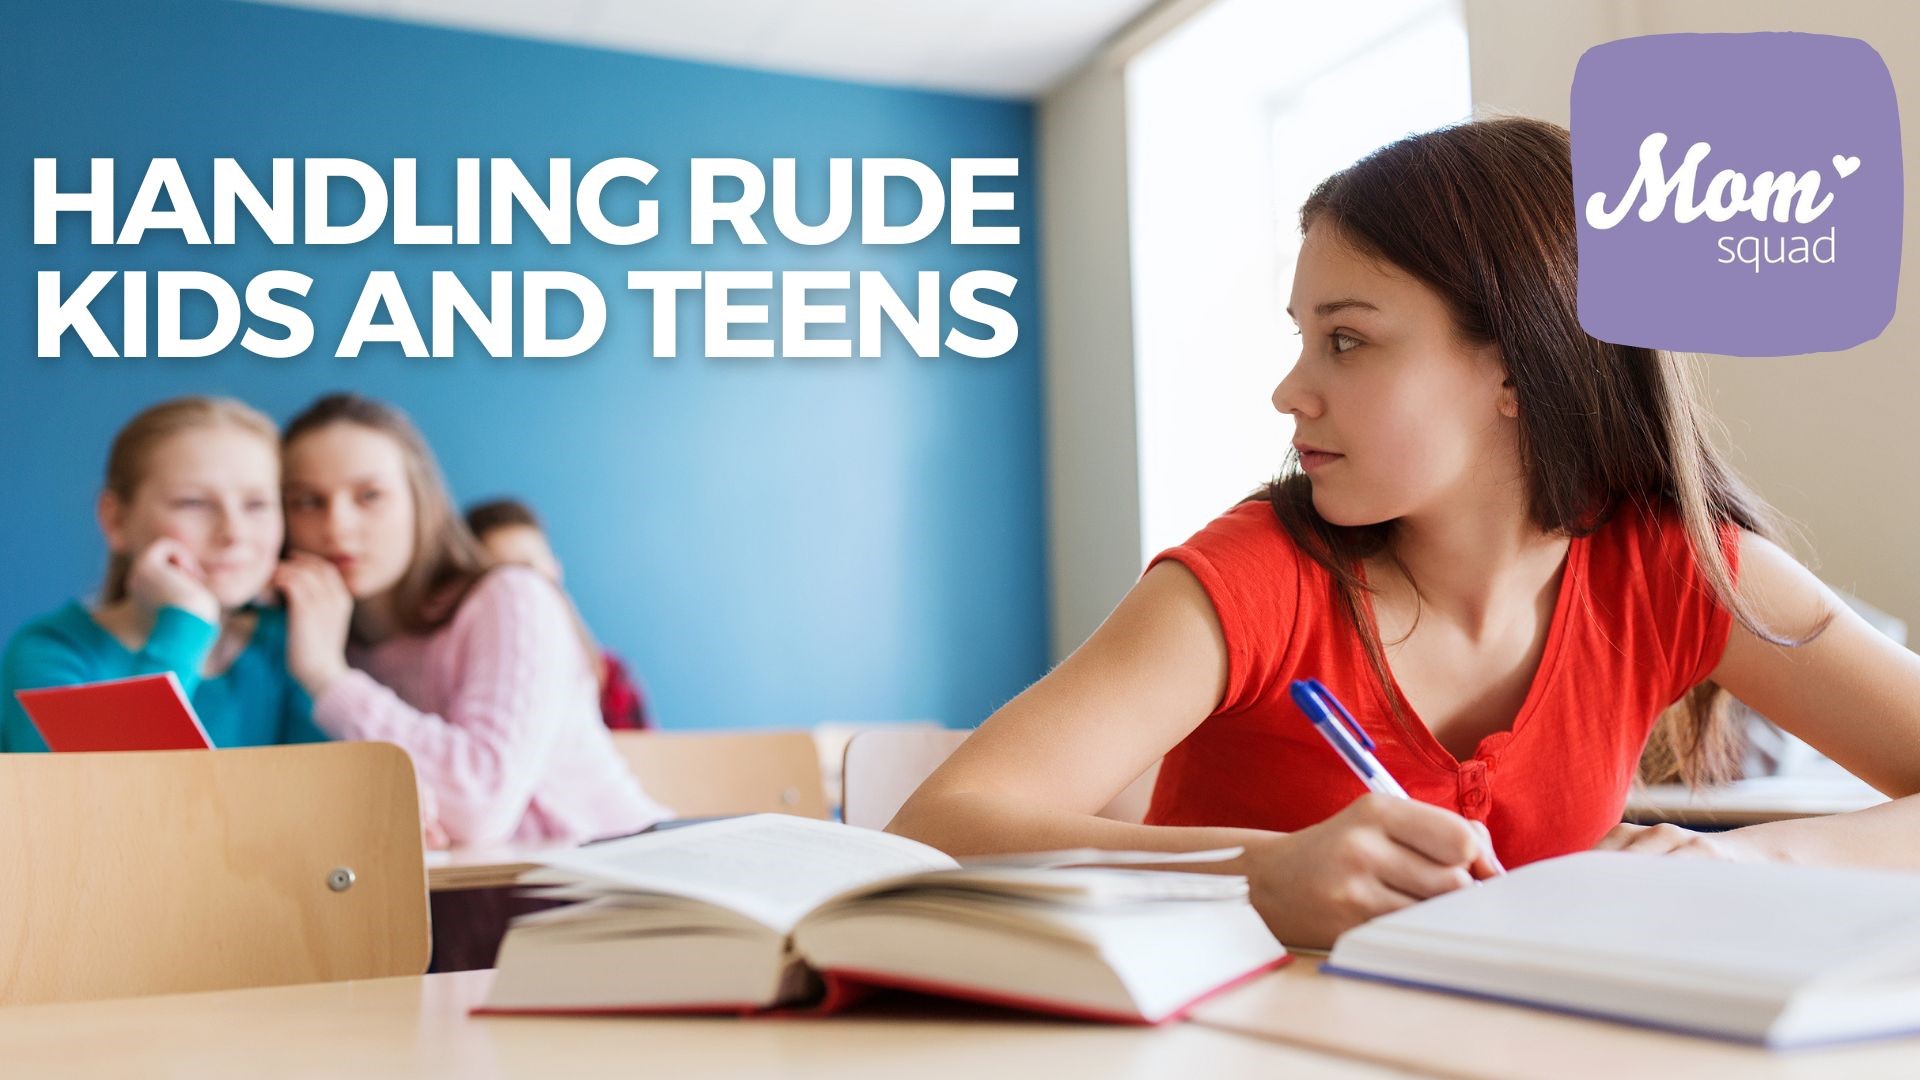 Maureen Kyle talks with an expert on how to handle rude behaviors in kids and teens. Tips to help you tackle social skills, cellphones and more.